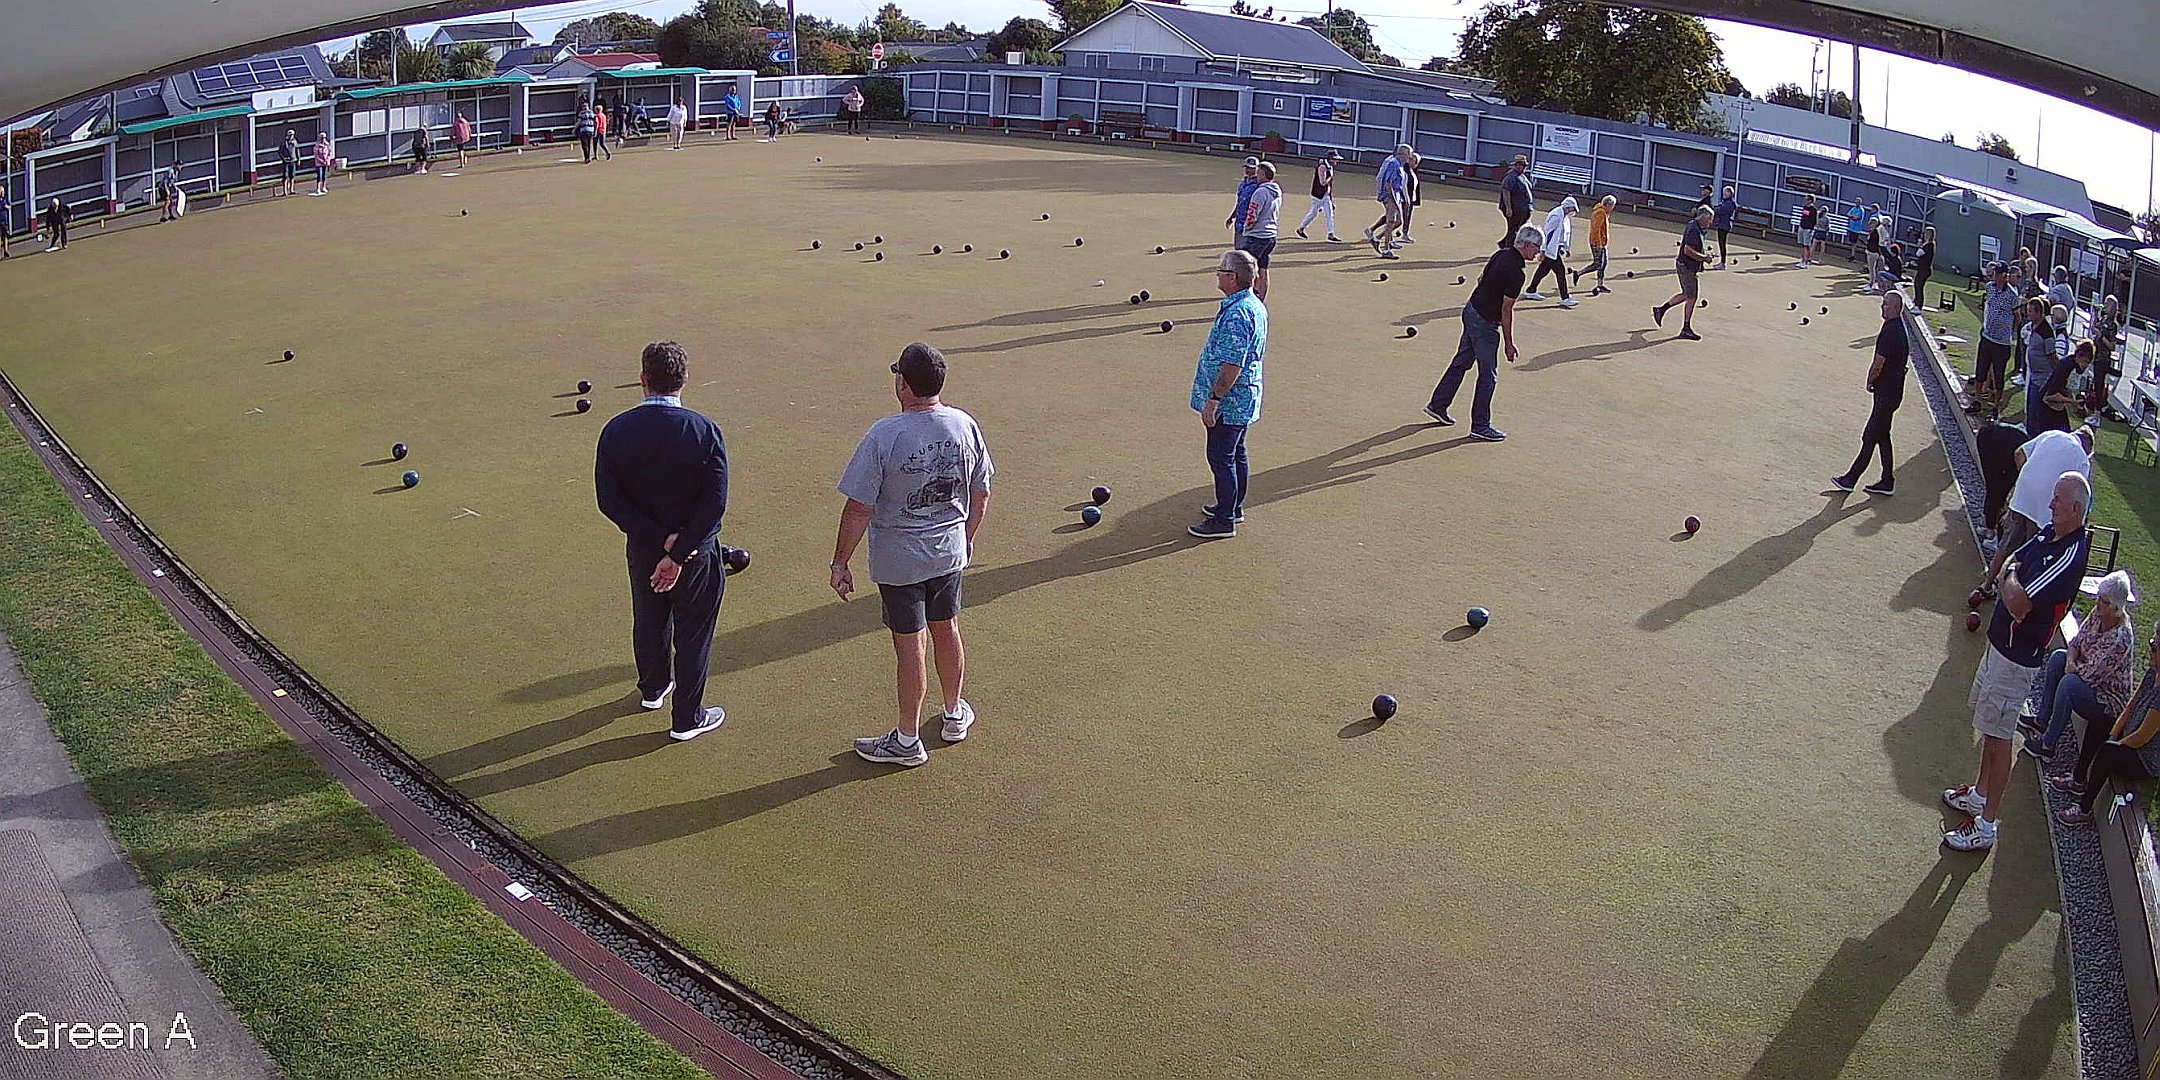 From the Webcams - Community Bowls Green 1 - 28 February 2022